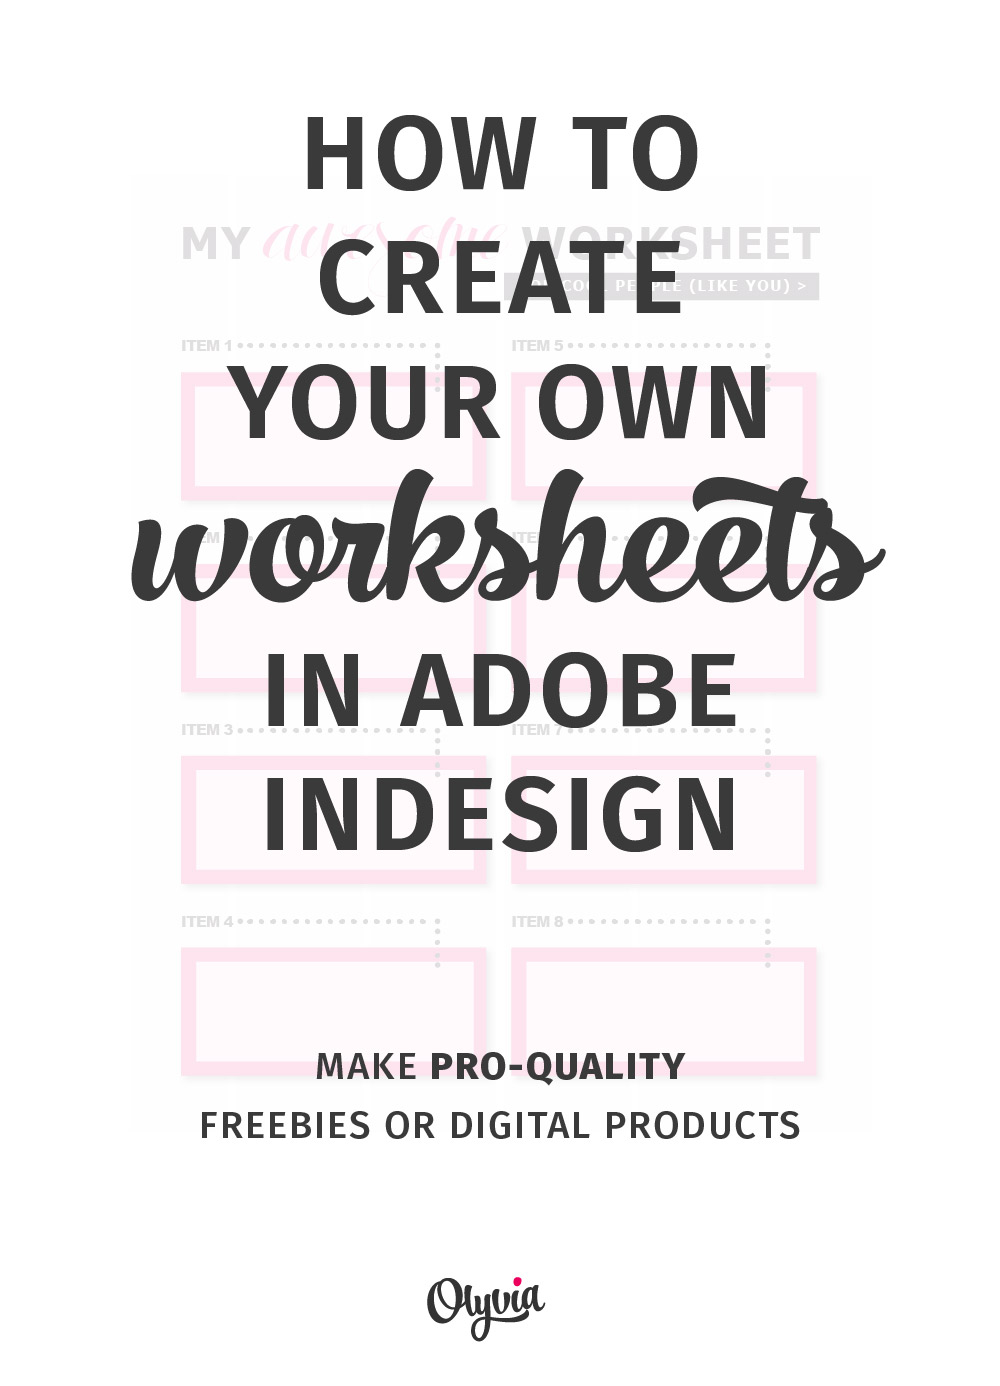 Tutorial: how to create your own worksheets in Adobe InDesign. (Also great for making your own blog printables, planners, digital products, etc.) Includes a free InDesign worksheet file download.